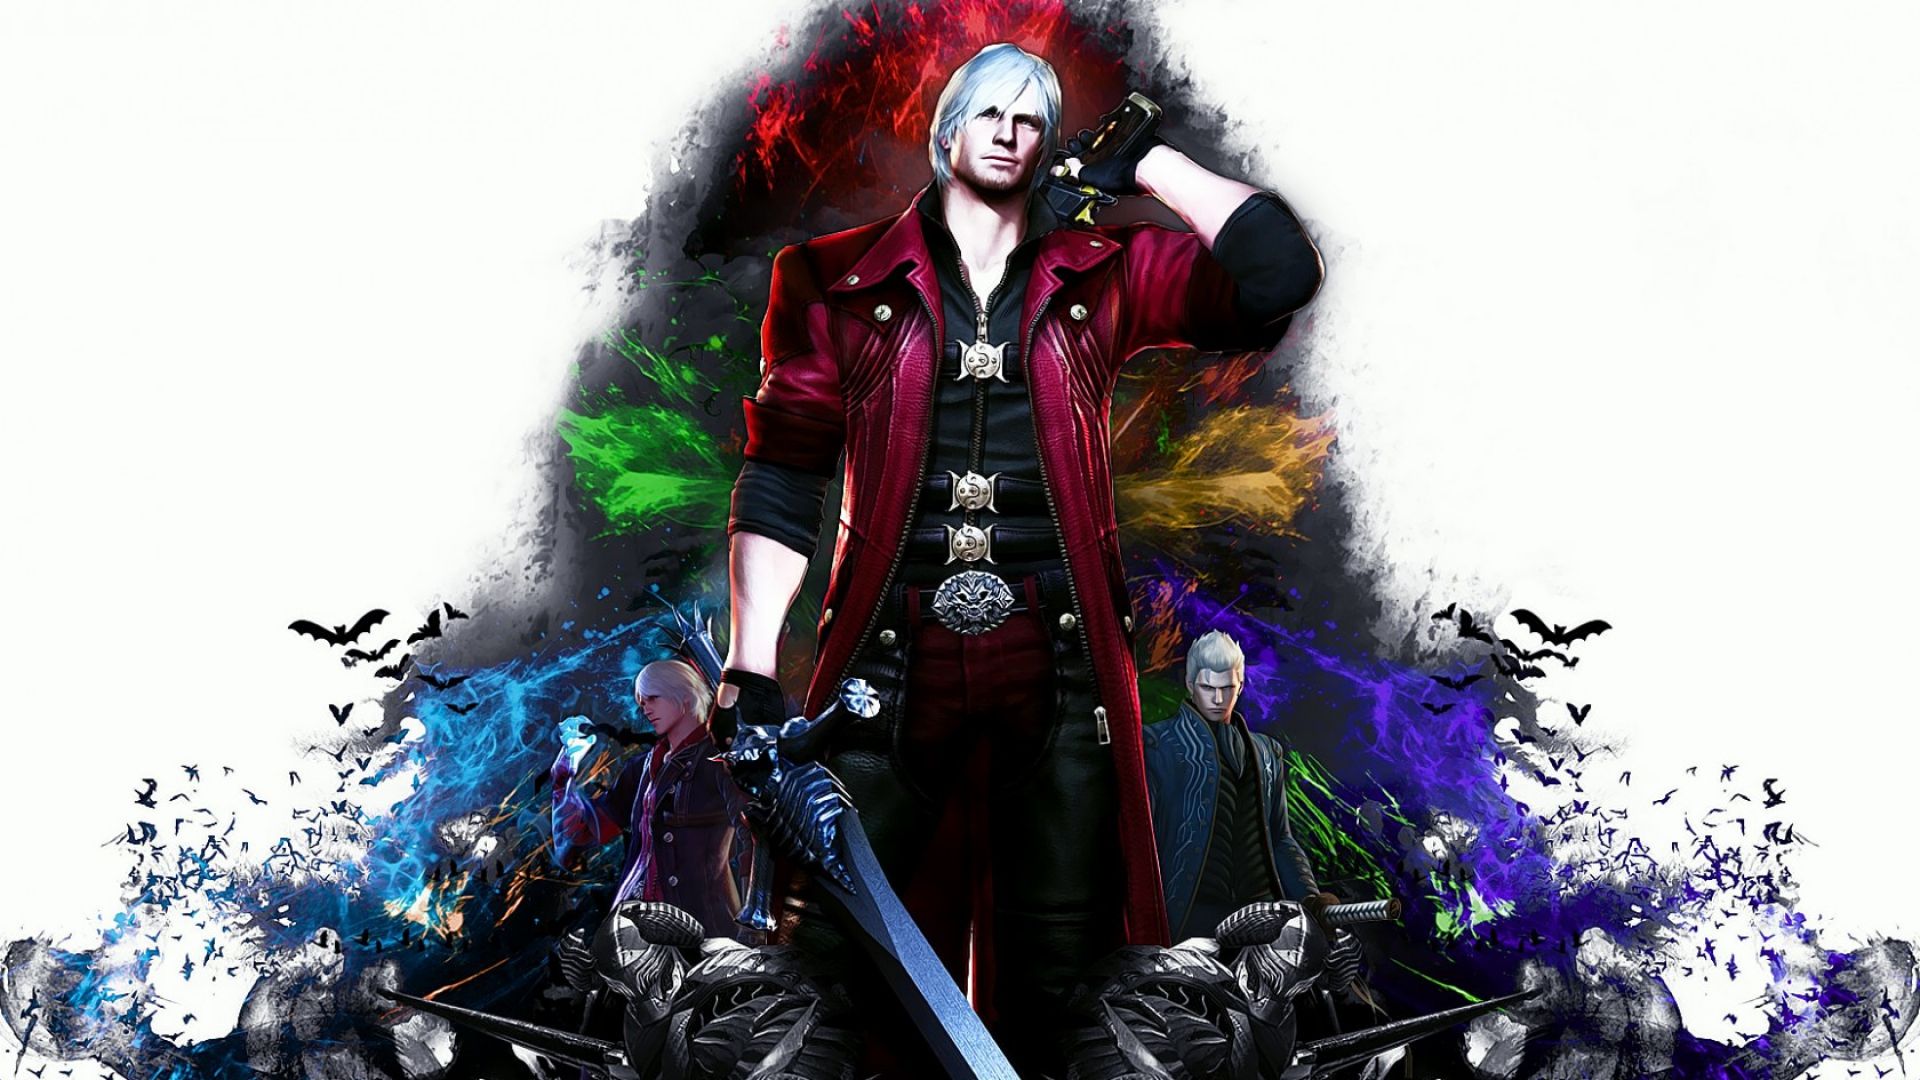 Full HD 1080p Devil may cry 4 Wallpapers HD, Desktop Backgrounds ...